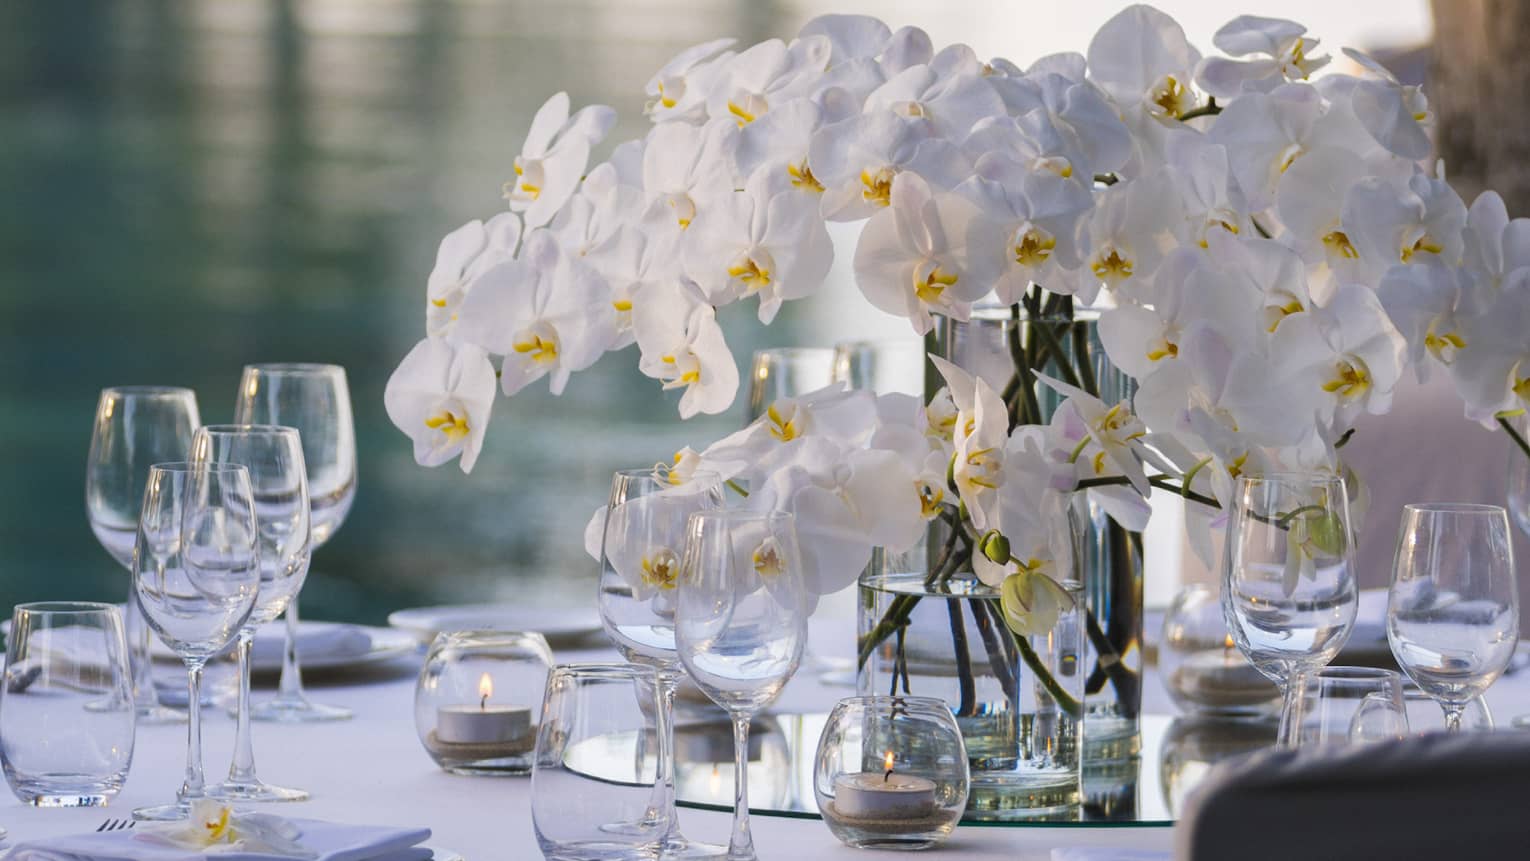 White orchids in vase on wedding dining table